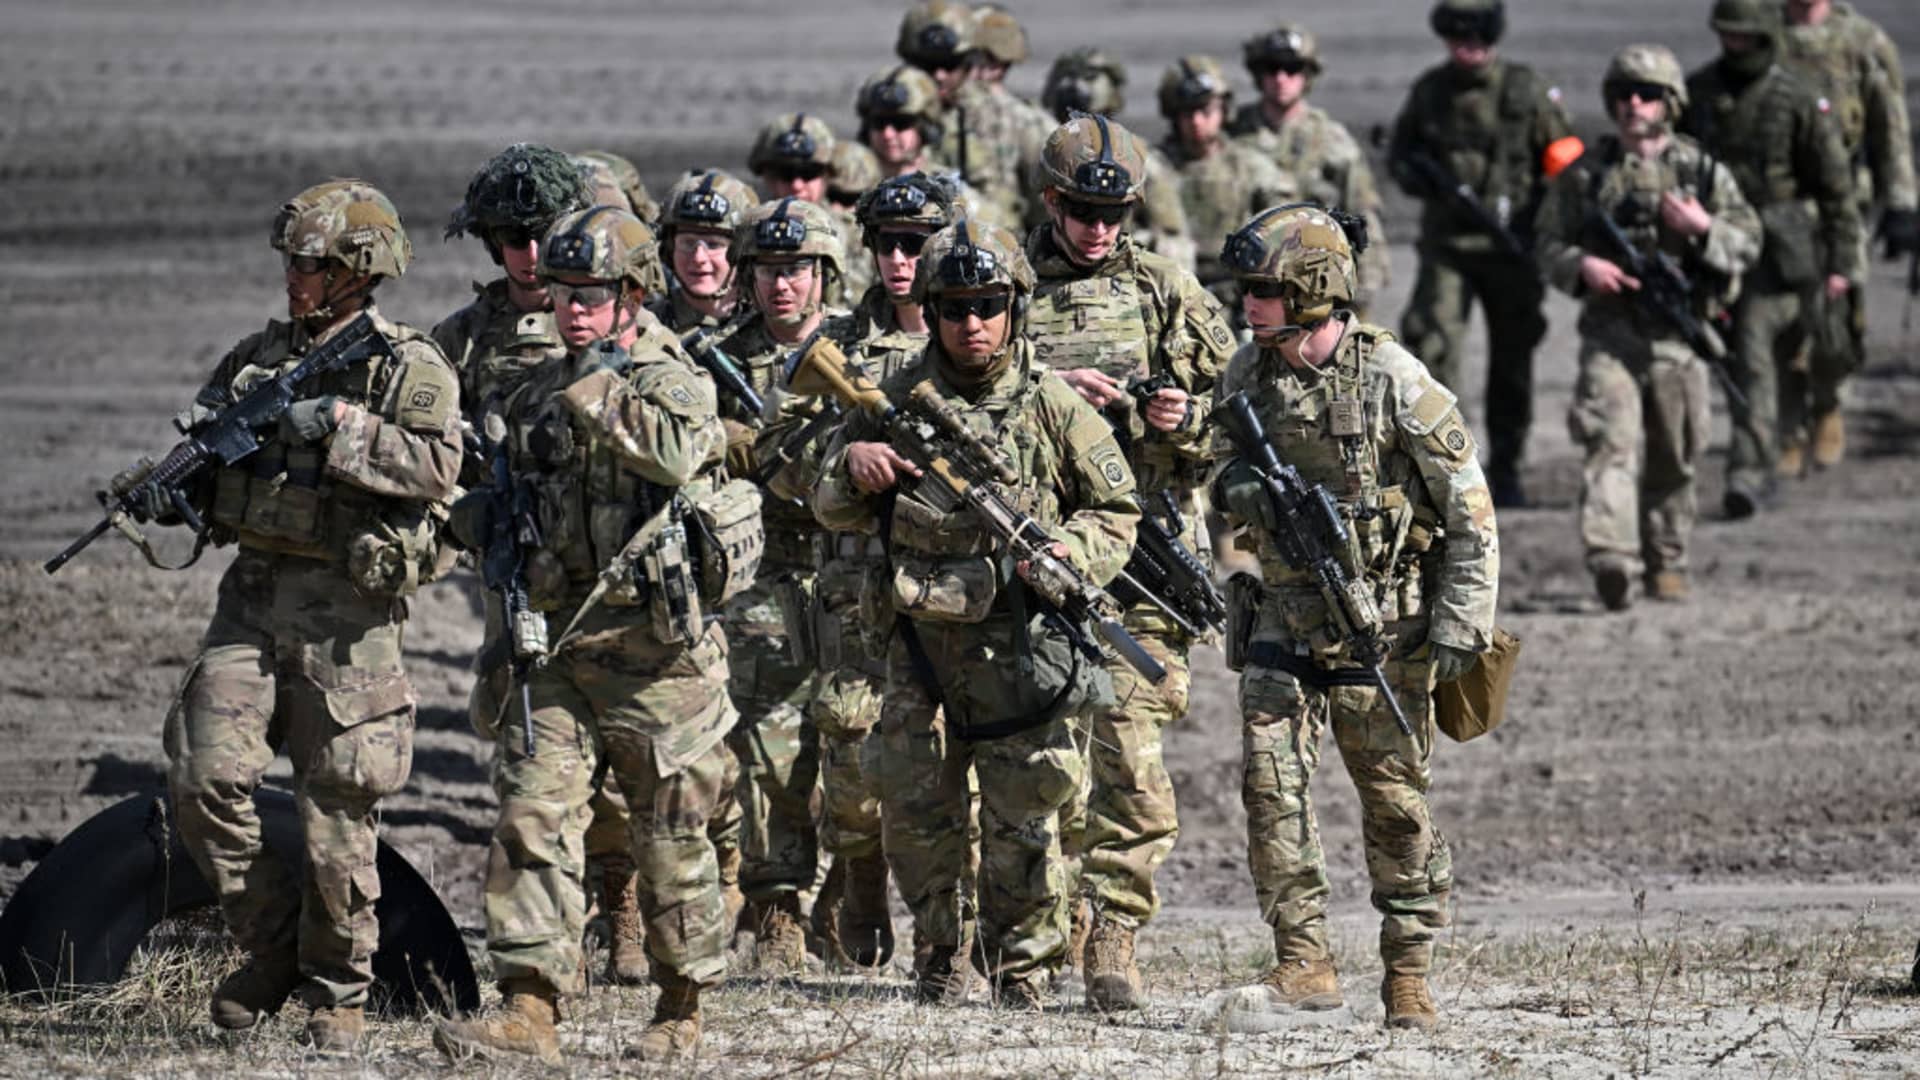 Troops from the Polish 18th Mechanised Division and the 82nd Airborne Division (USA) take part in tactical and fire training on April 8, 2022 in Nowa Deba, Poland. 